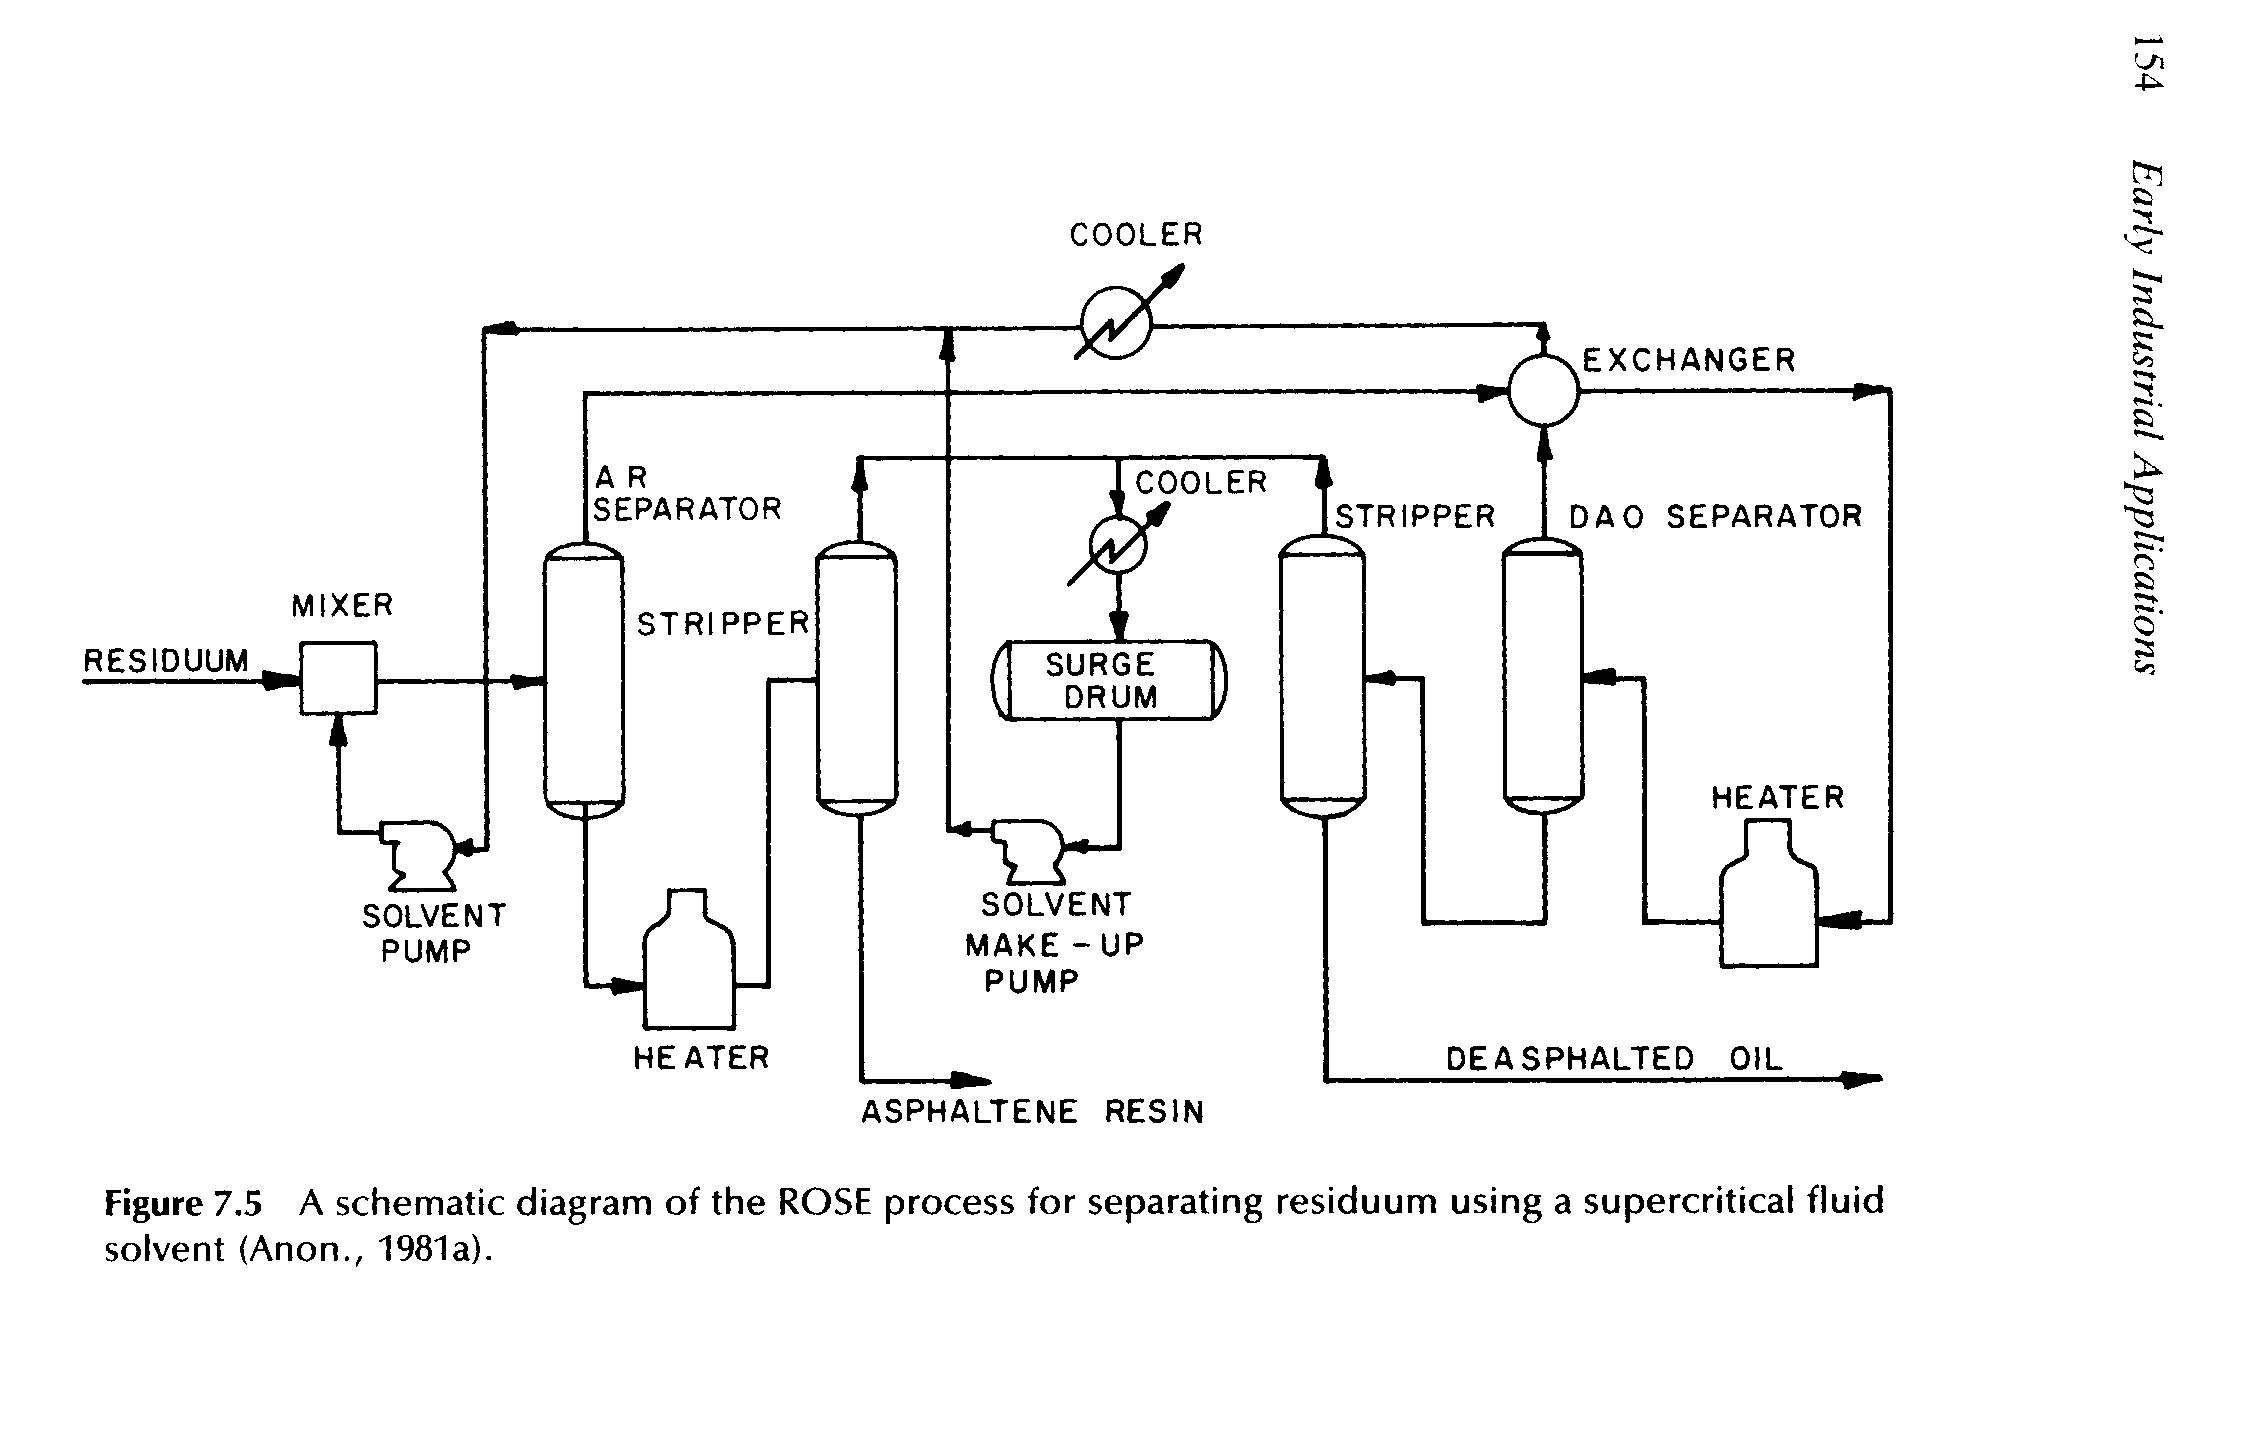 Figure 7.5 A schematic diagram of the ROSE process for separating residuum using a supercritical fluid solvent (Anon., 1981a).